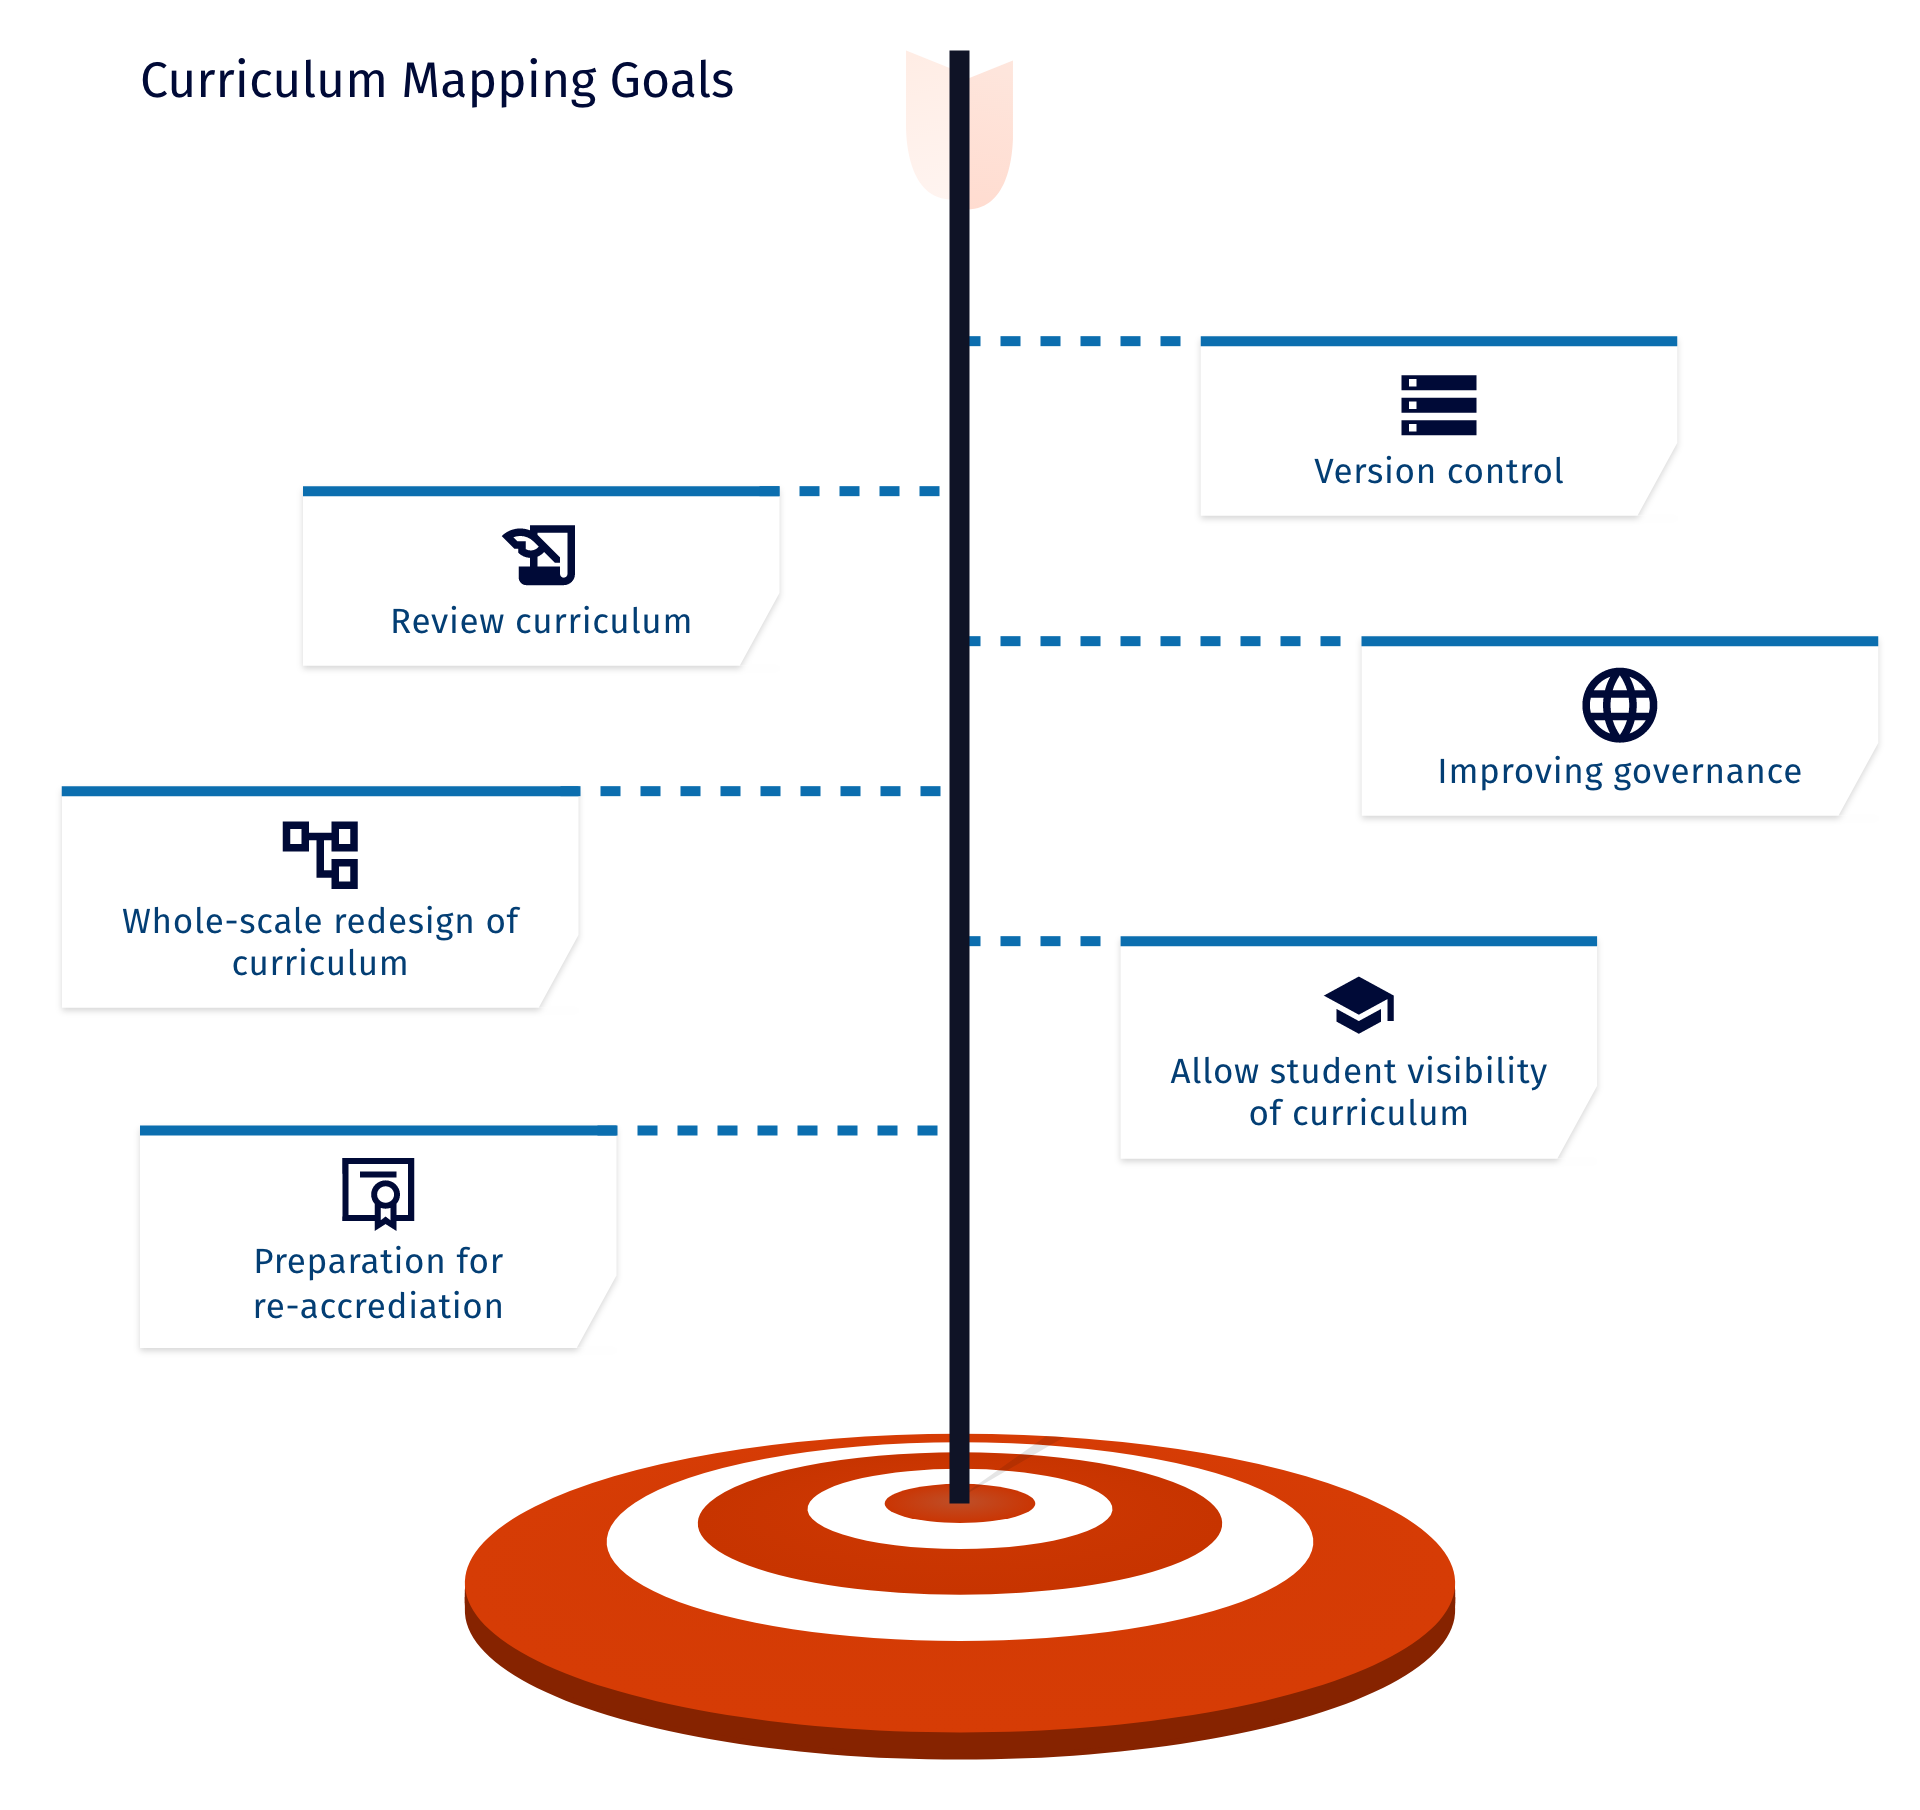 An image showing an arrow in a target, showing the following goals you might have for curriculum mapping: review curriculum, whole scale redesign of curriculum, preparation for re-accreditation, version control, improving governance, allow student visibility of curriculum